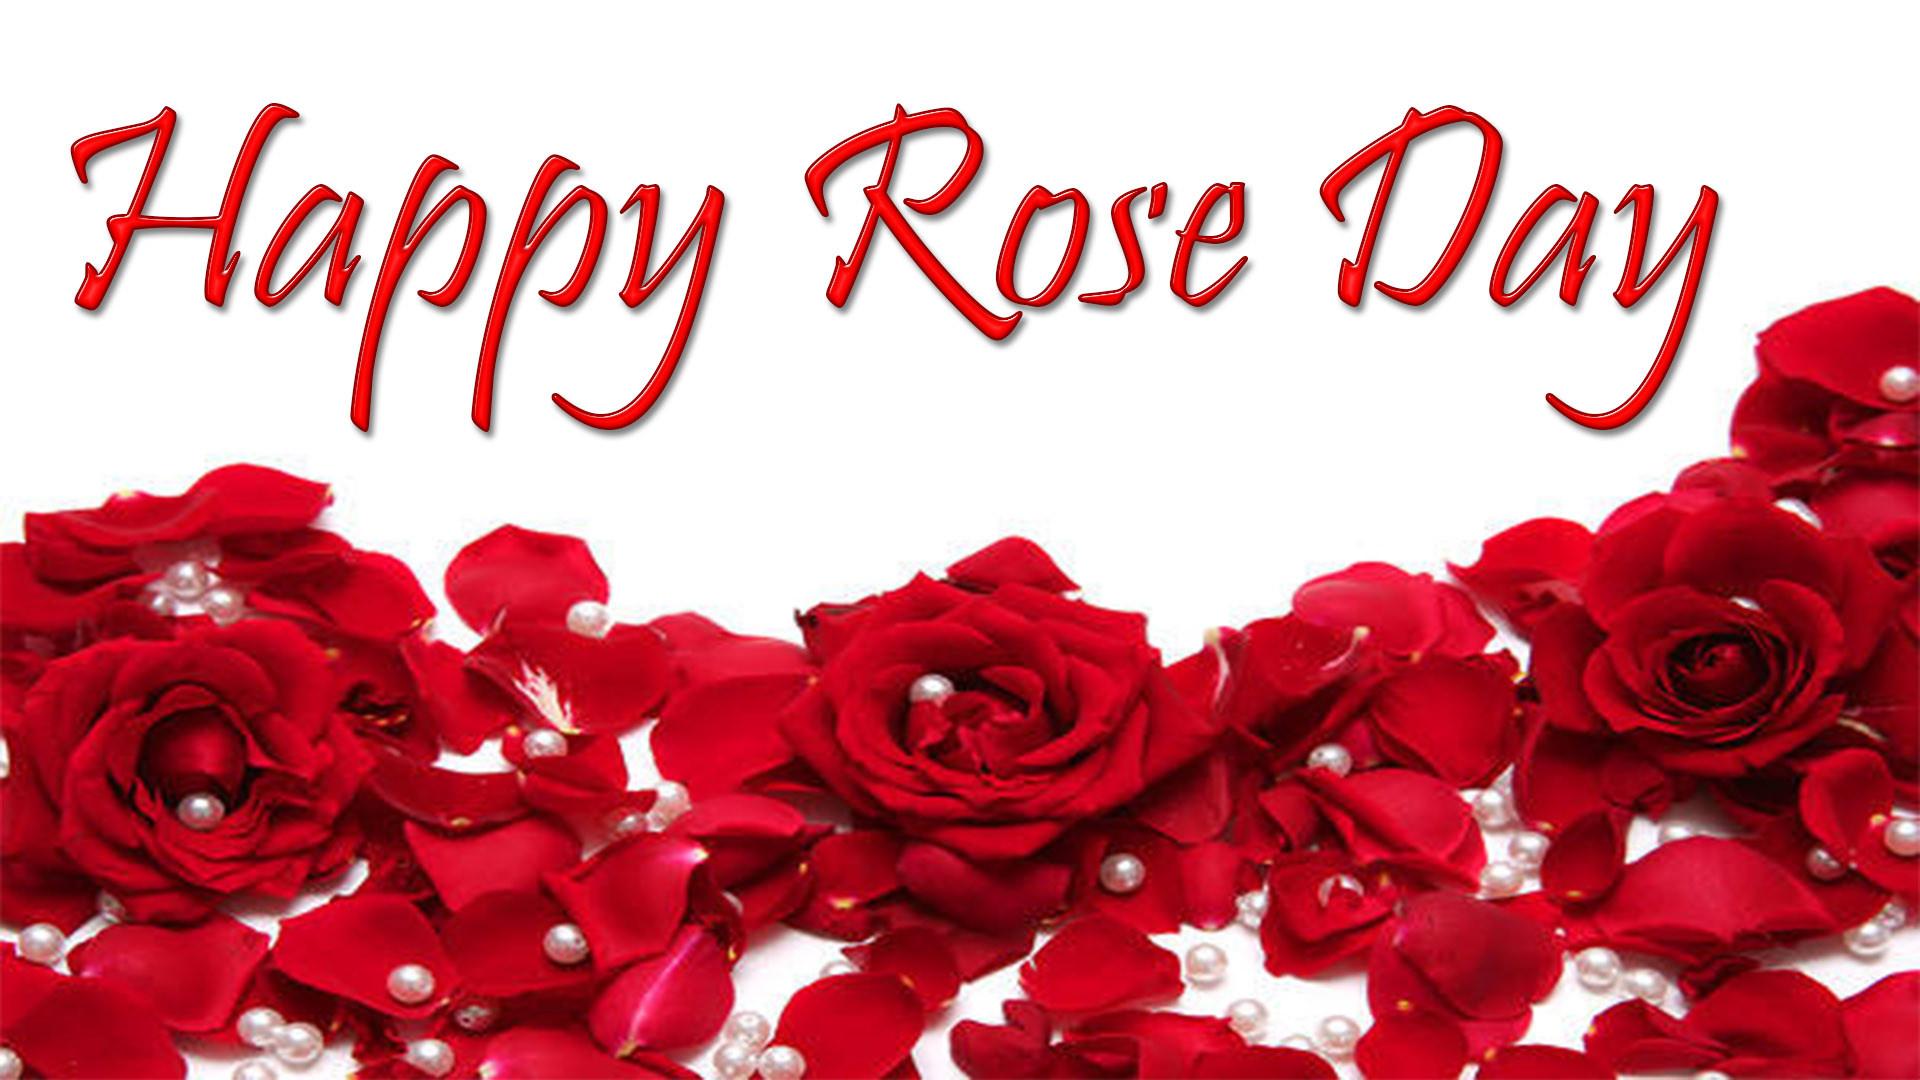 happy rose day hd image